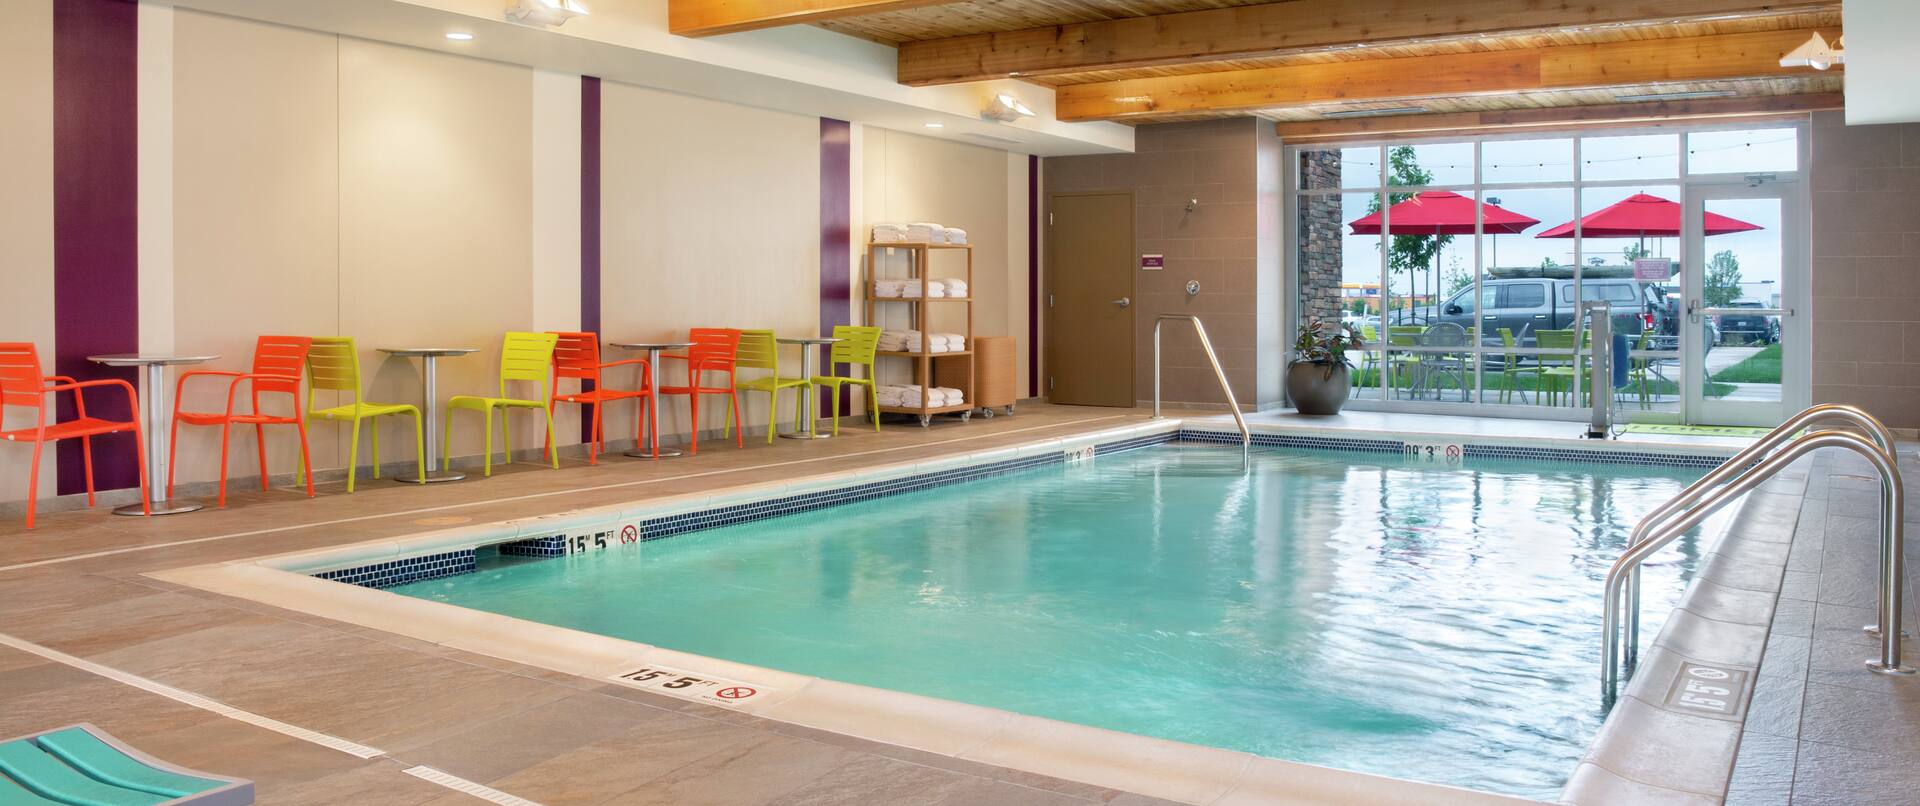 An Indoor Pool and Lounge Chairs